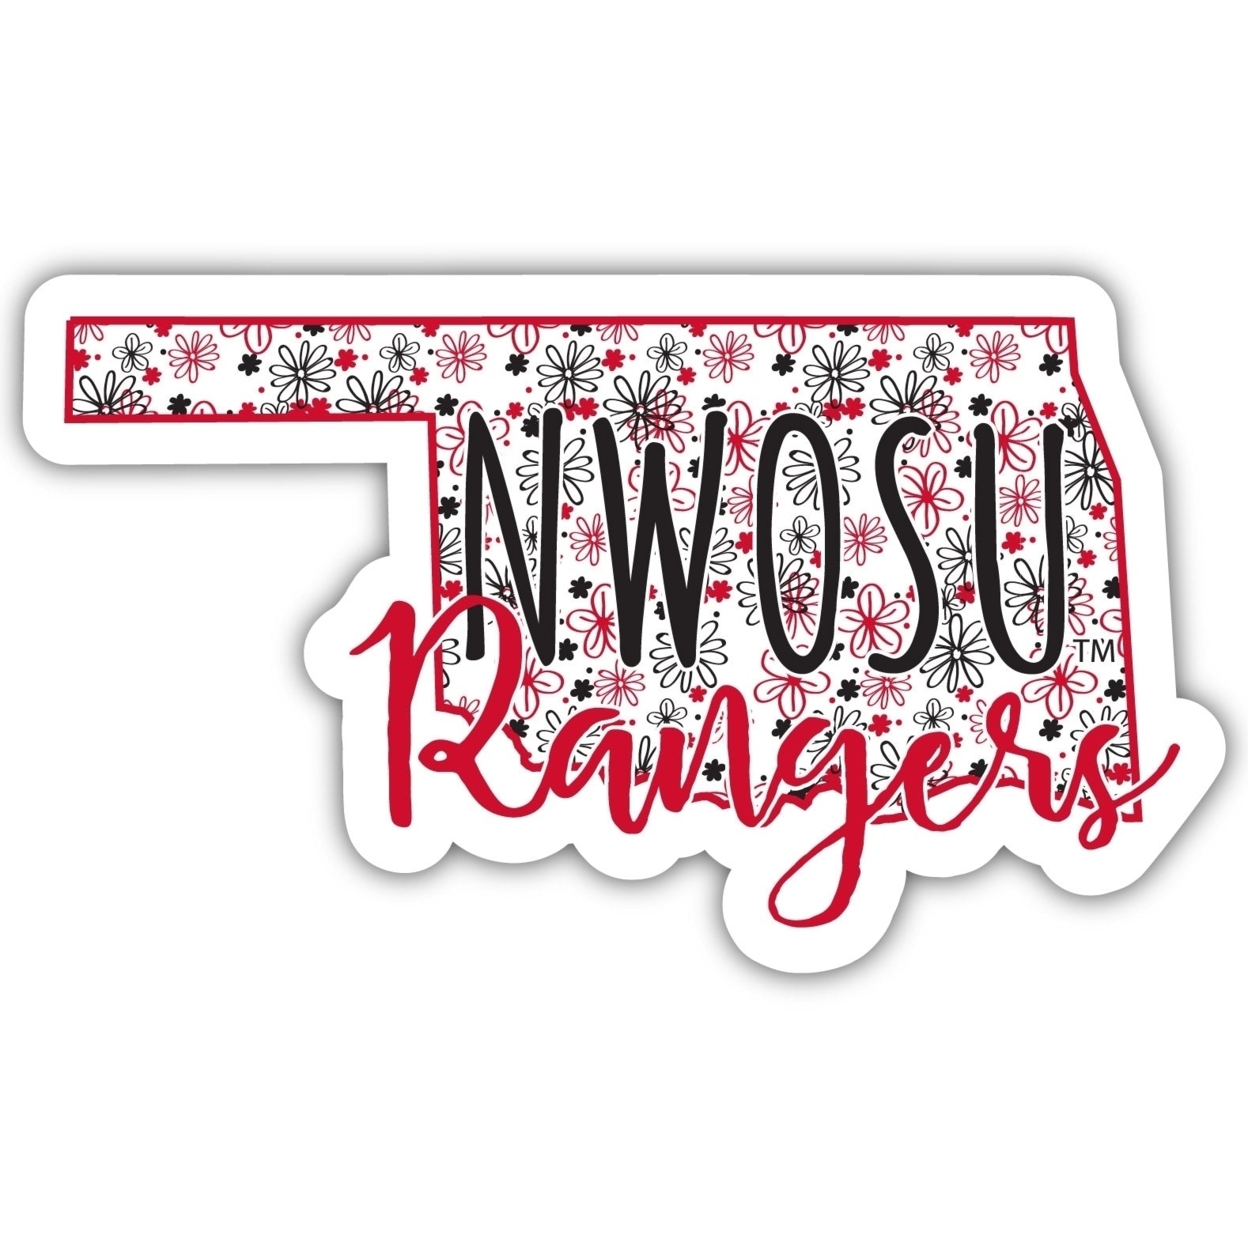 Northwestern Oklahoma State University Floral State Die Cut Decal 4-Inch